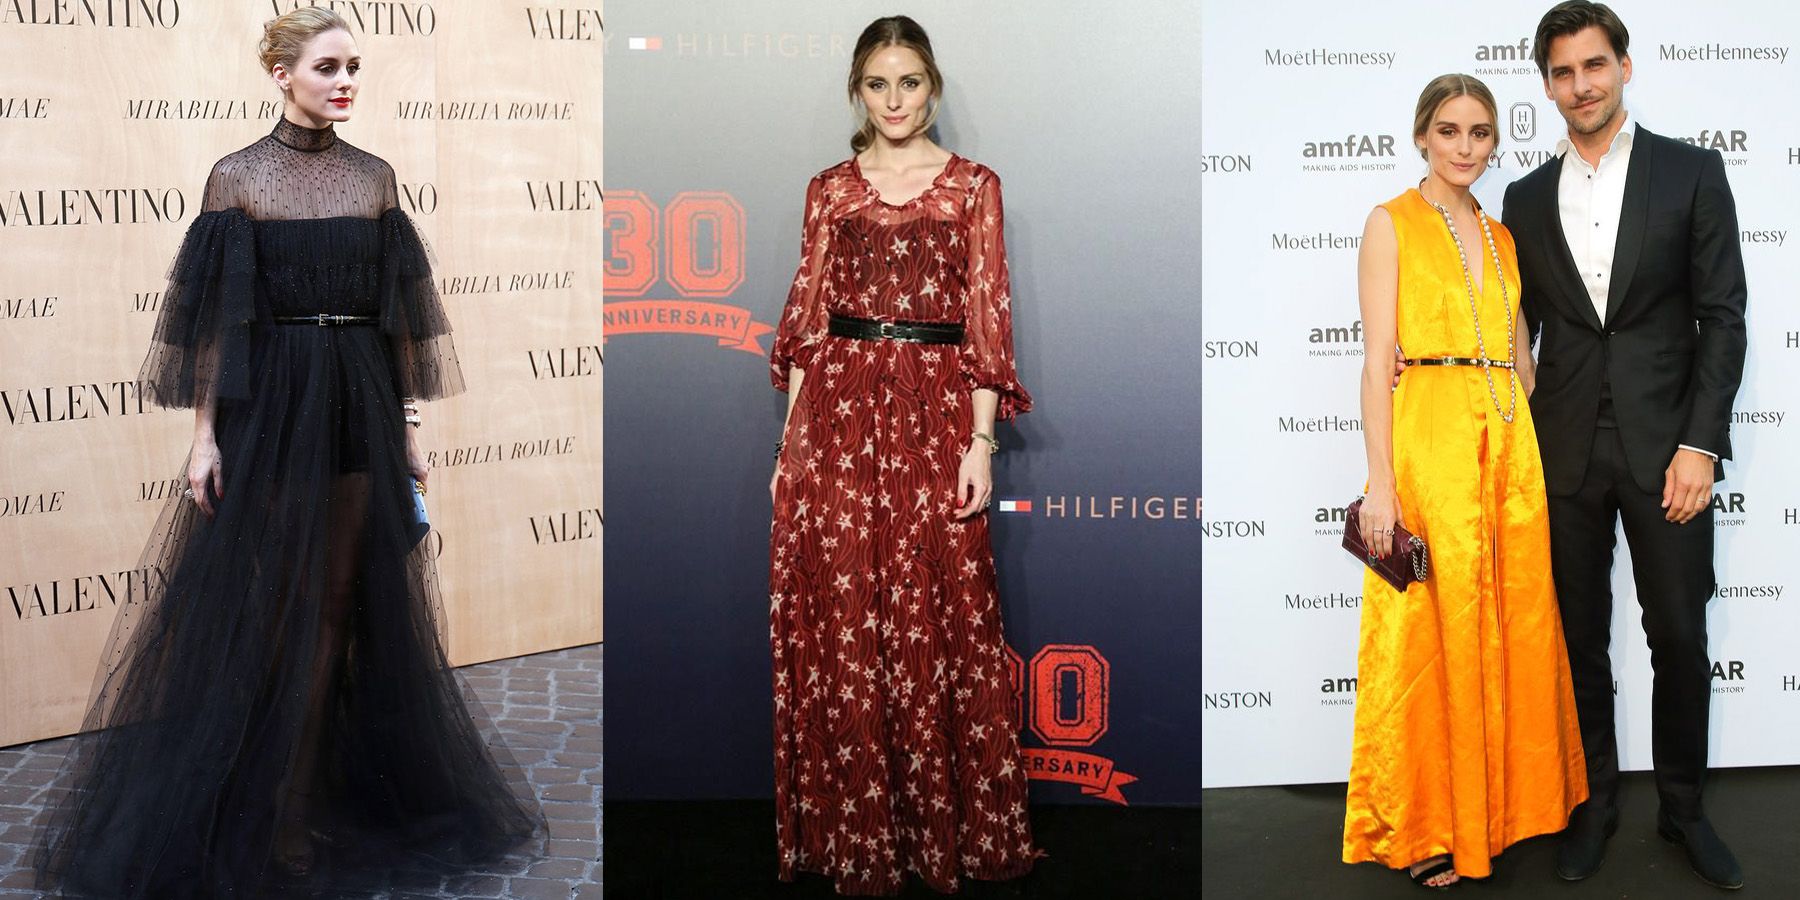 Let's Have a Stylish Look with Olivia Palermo's Belt 